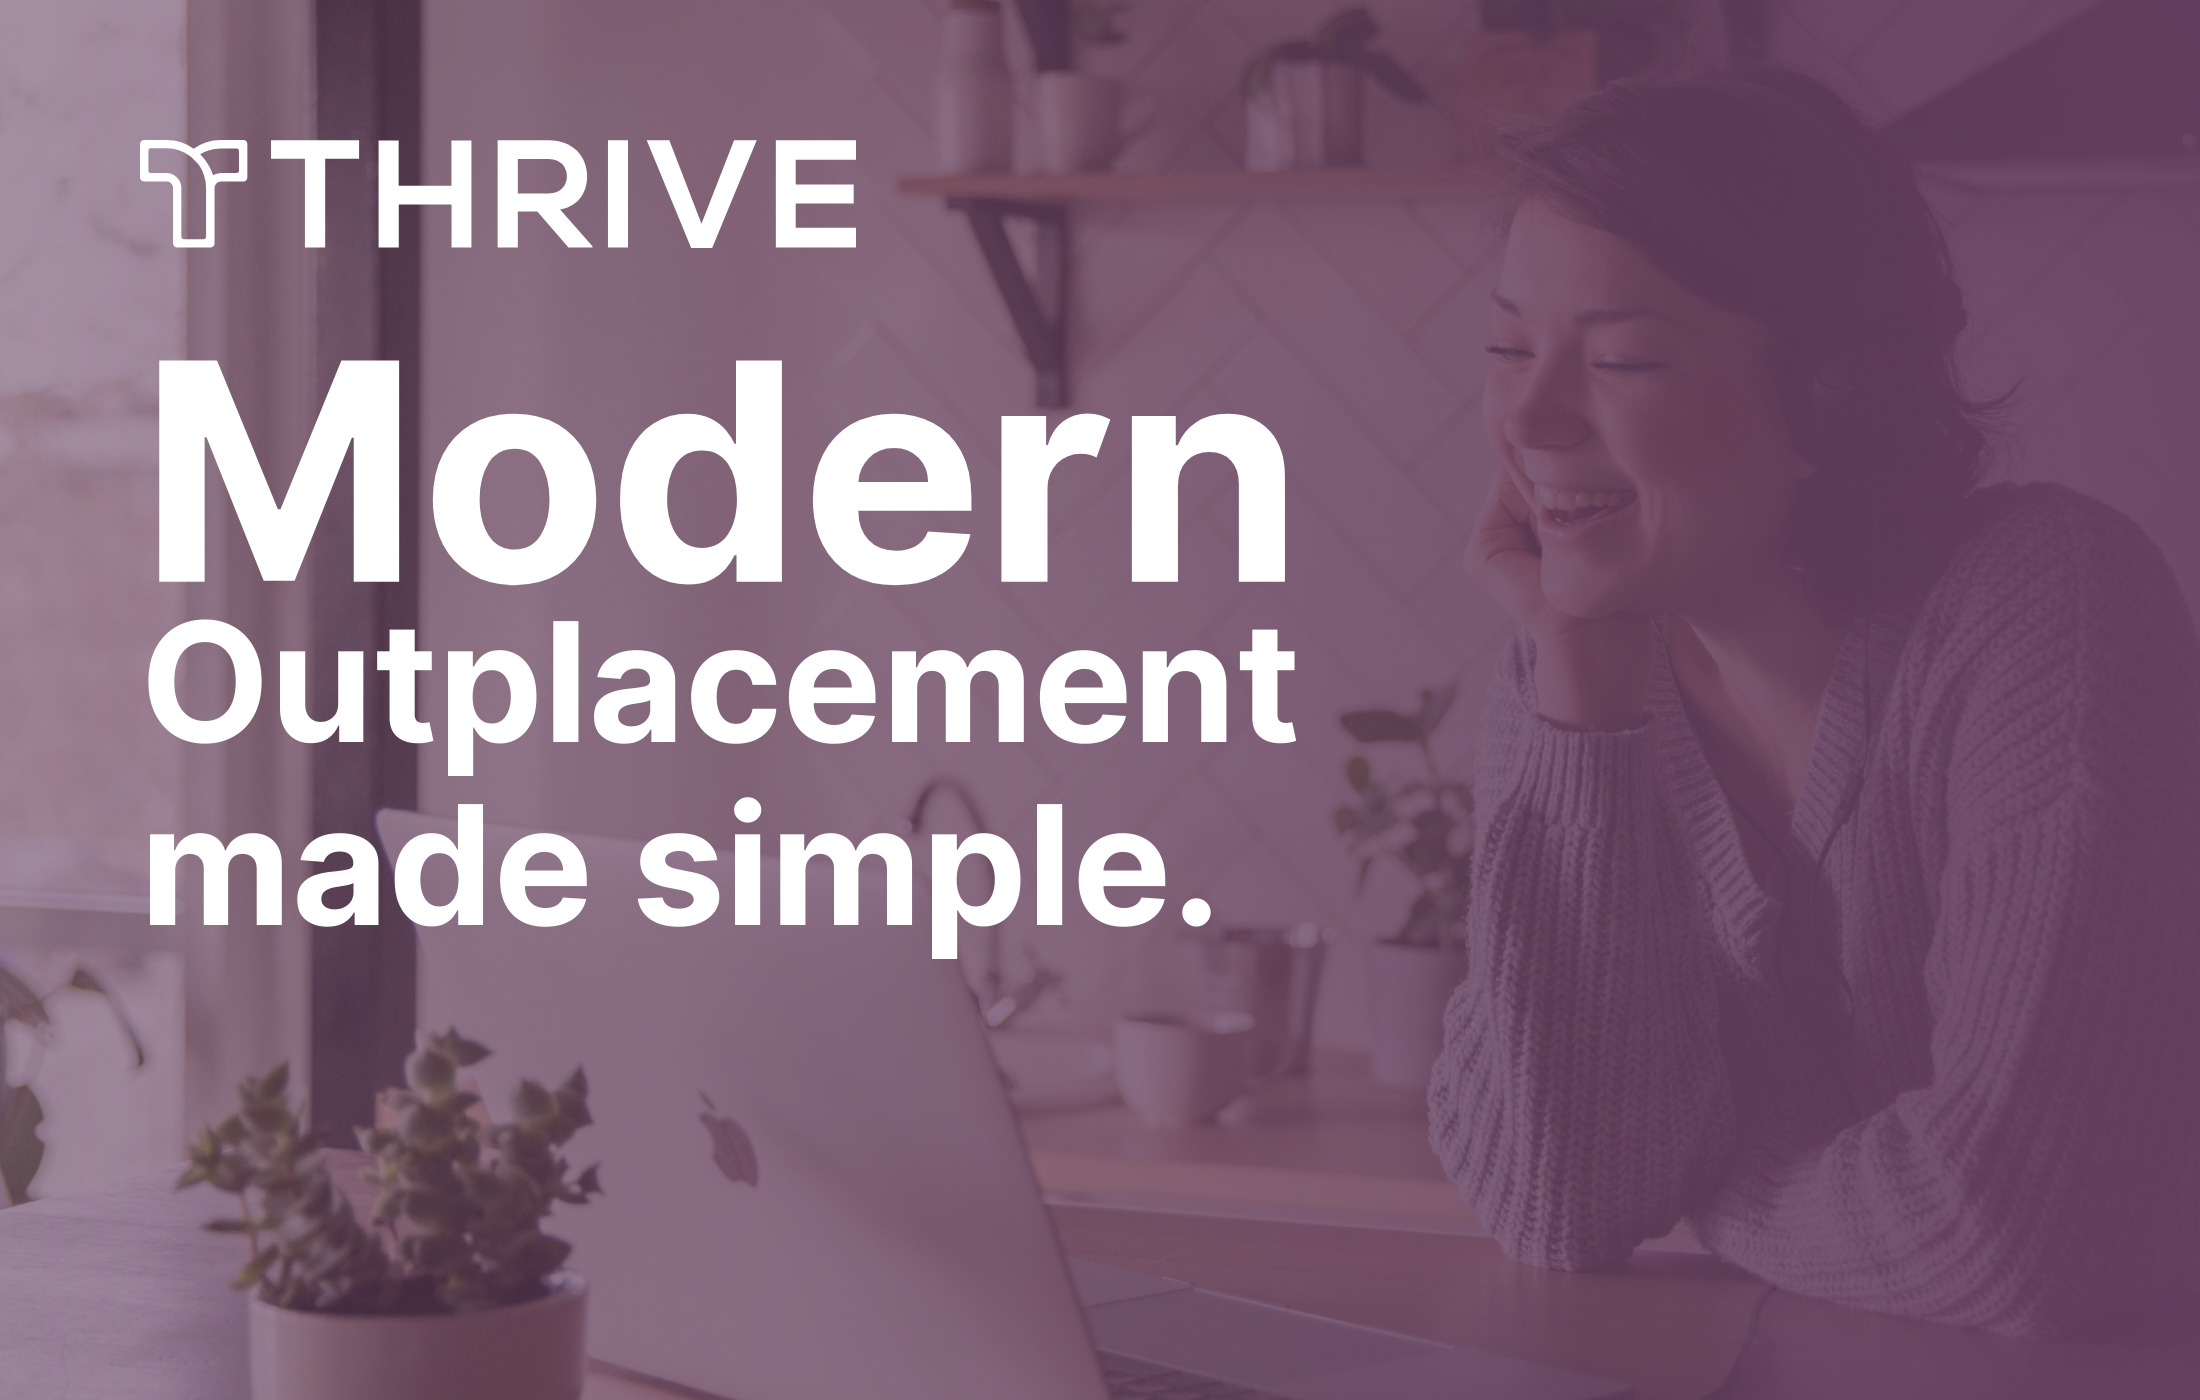 Our modern outplacement solution is a digital platform that combines advanced software & personalized support to help organizations manage their layoffs.